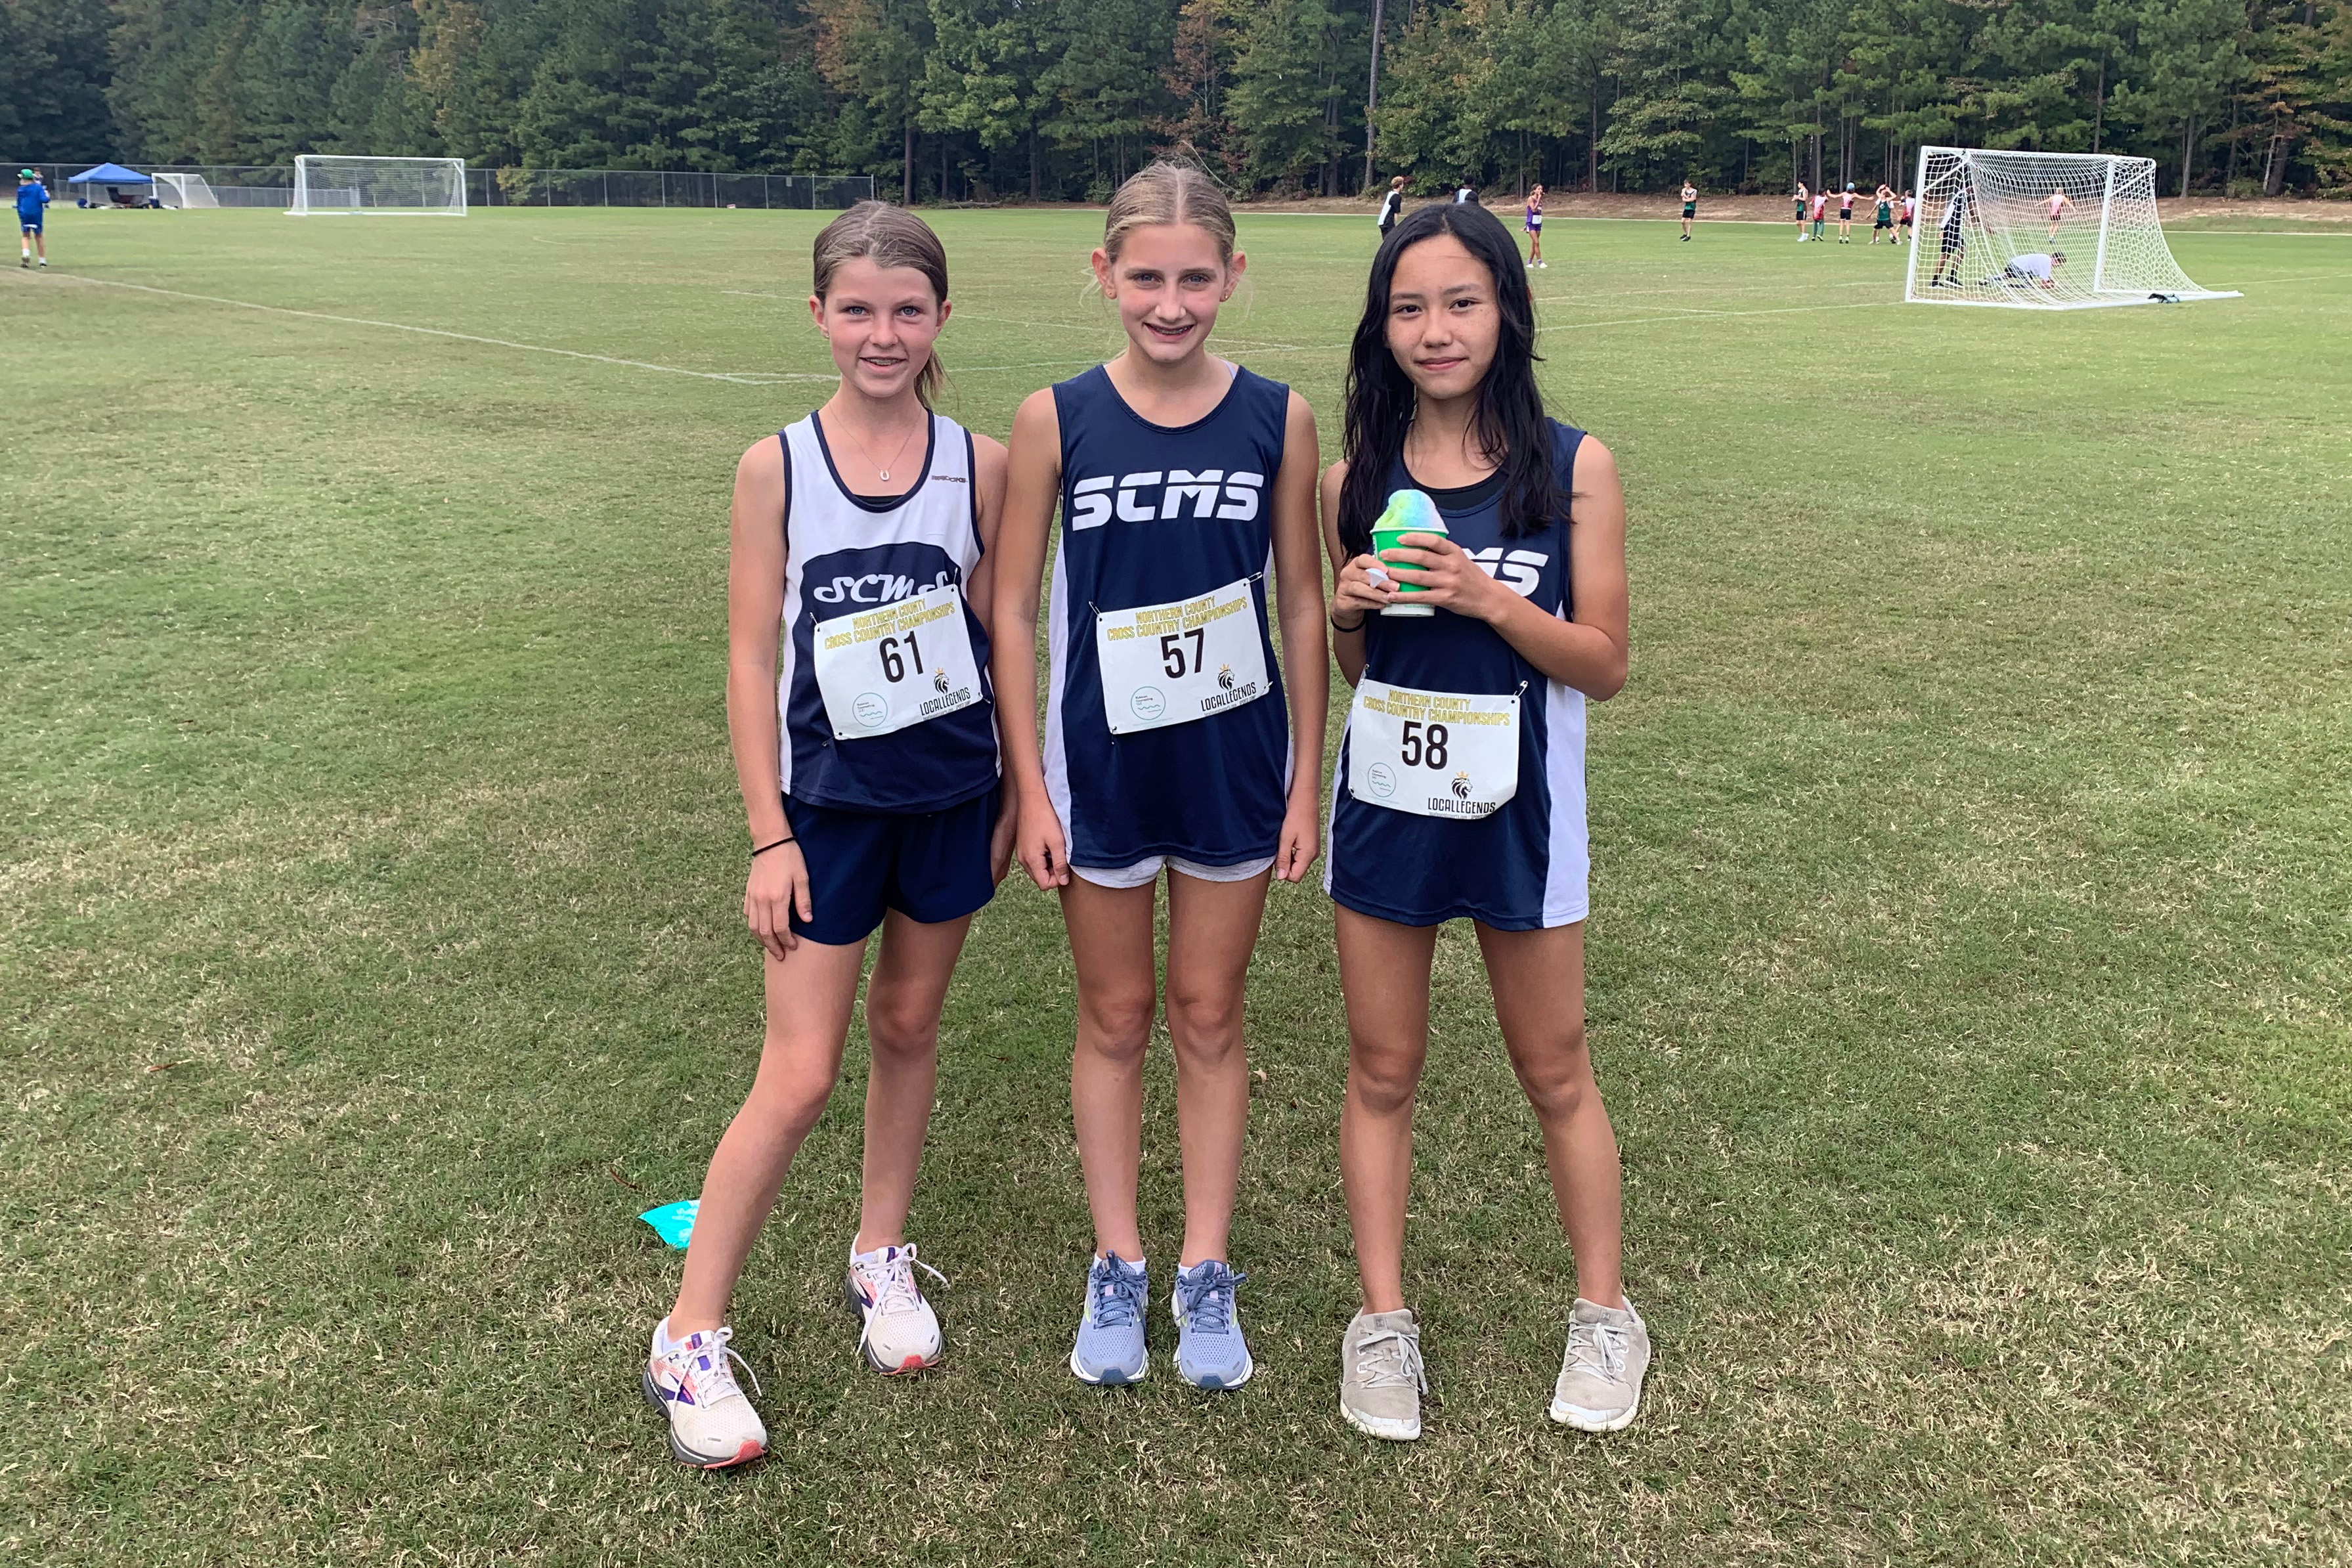 Three girls cross country runners pose for a photo